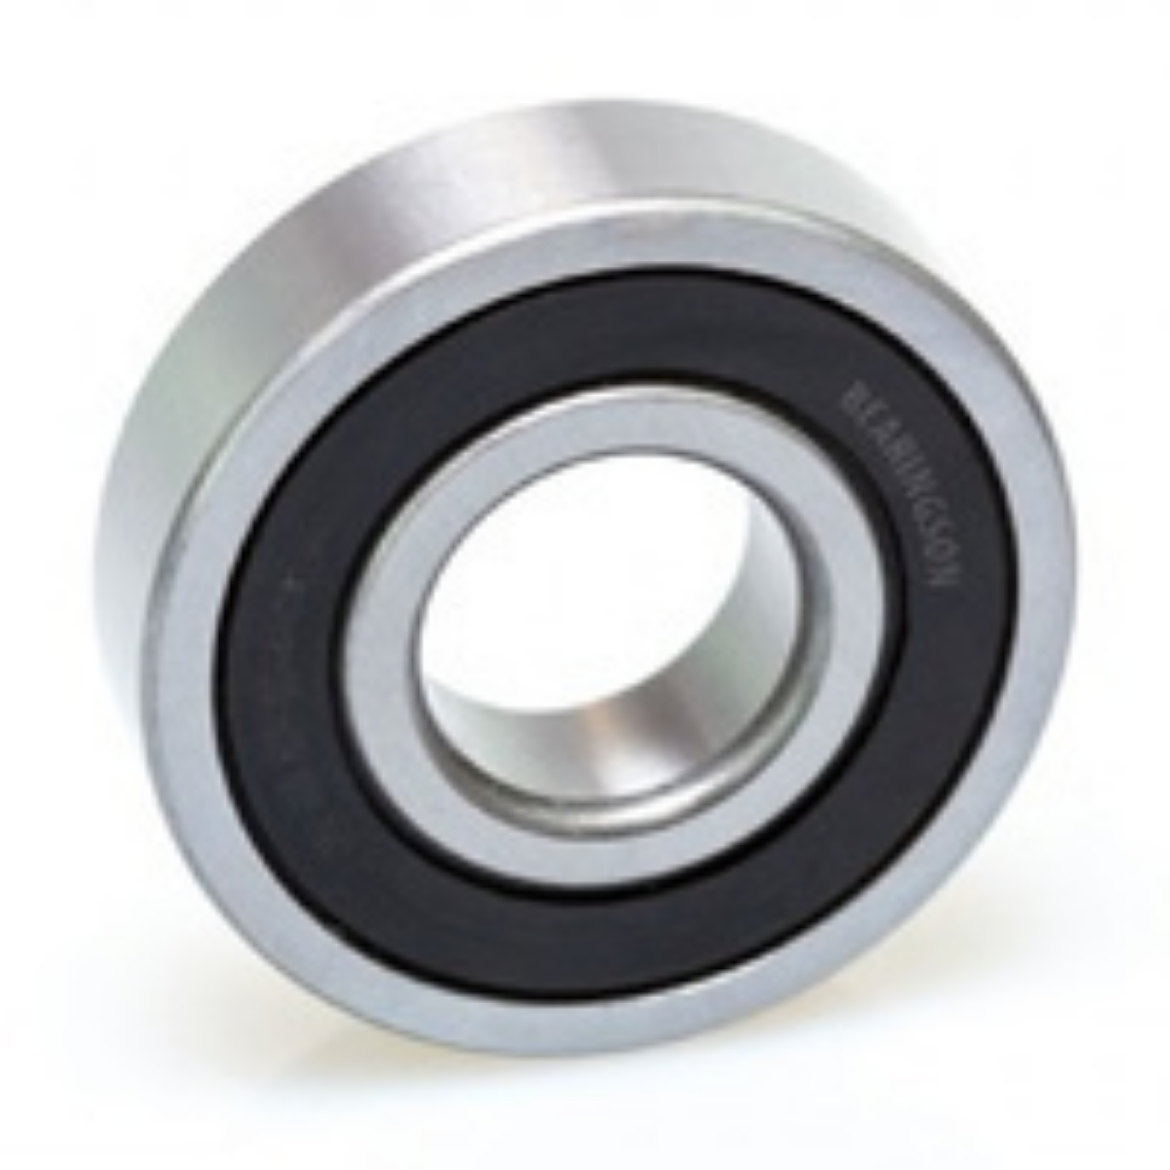 Picture of BALL BEARING METRIC 6X19X6